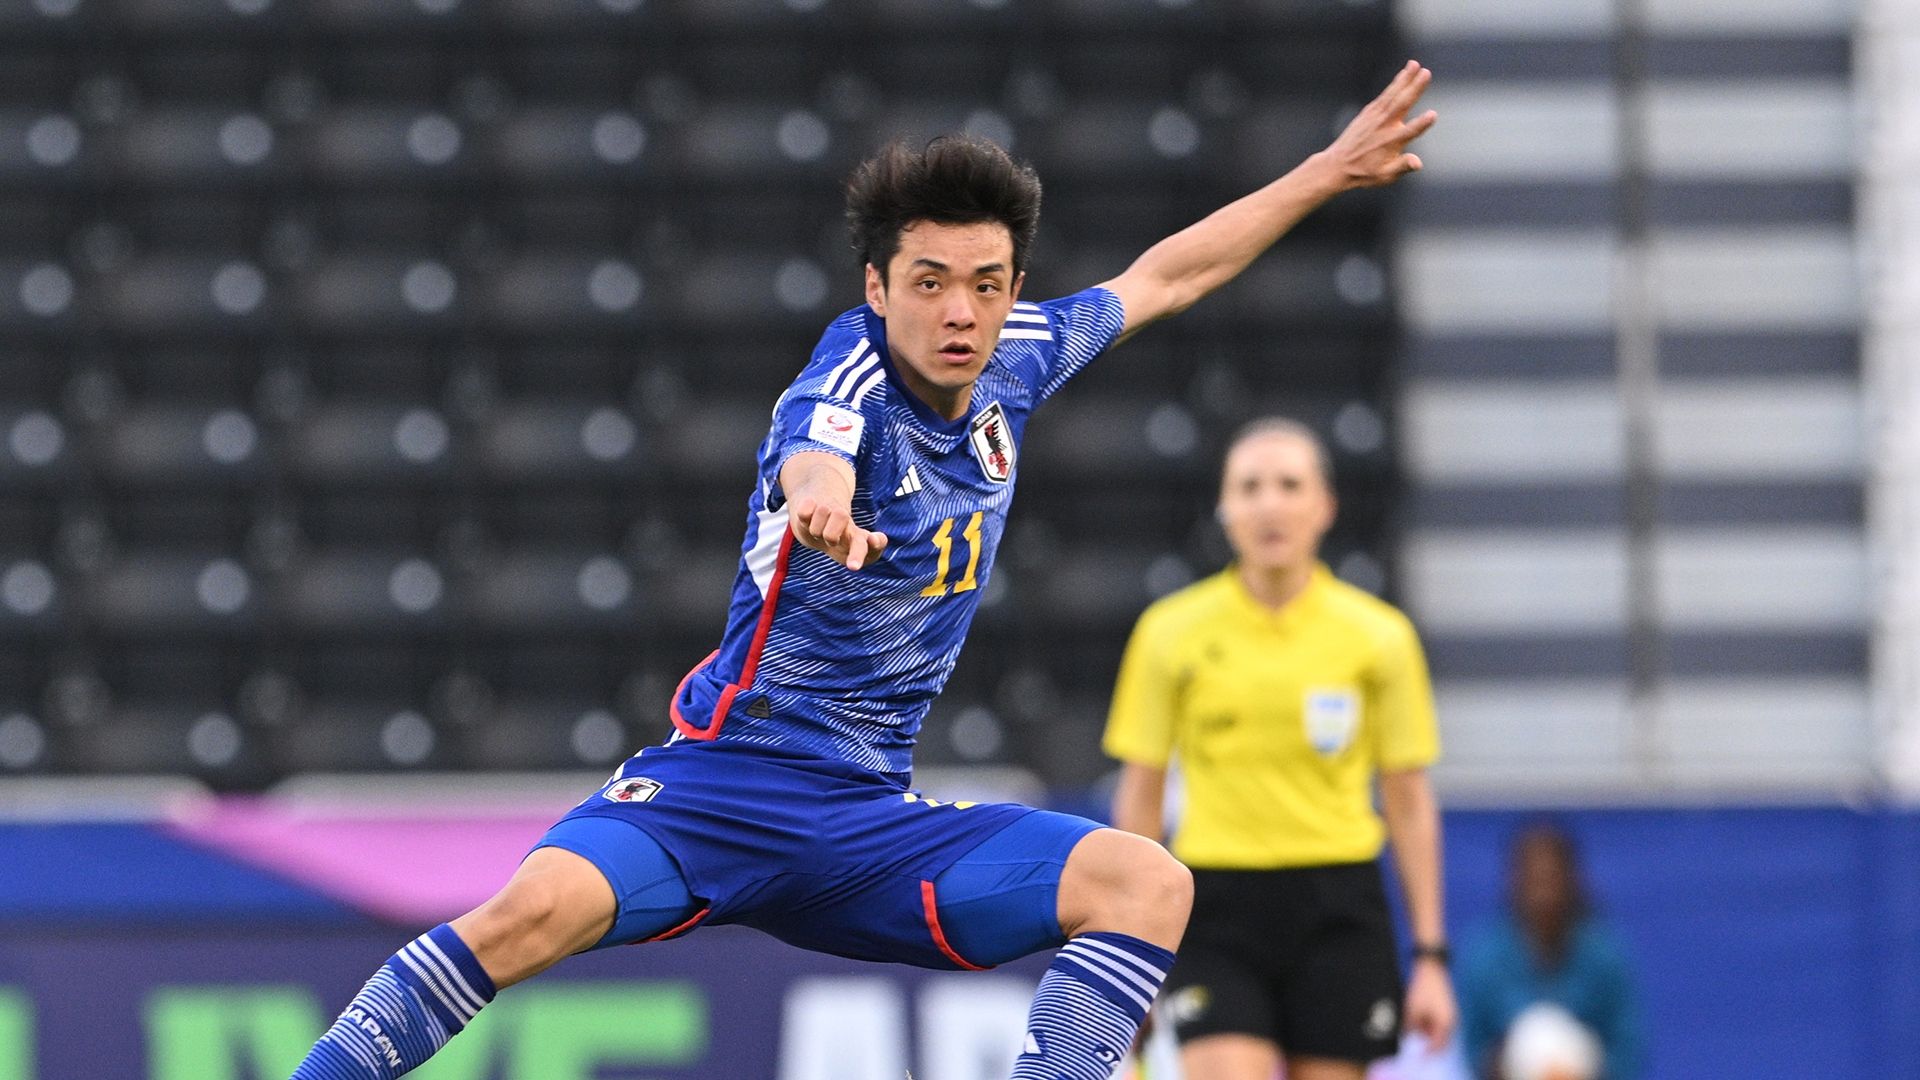 U-23 Japan National Team wins their second consecutive victory with a shutout win over the UAE National Team!Advancement to final tournament decided before Japan-Korea game | Goal.com Japan